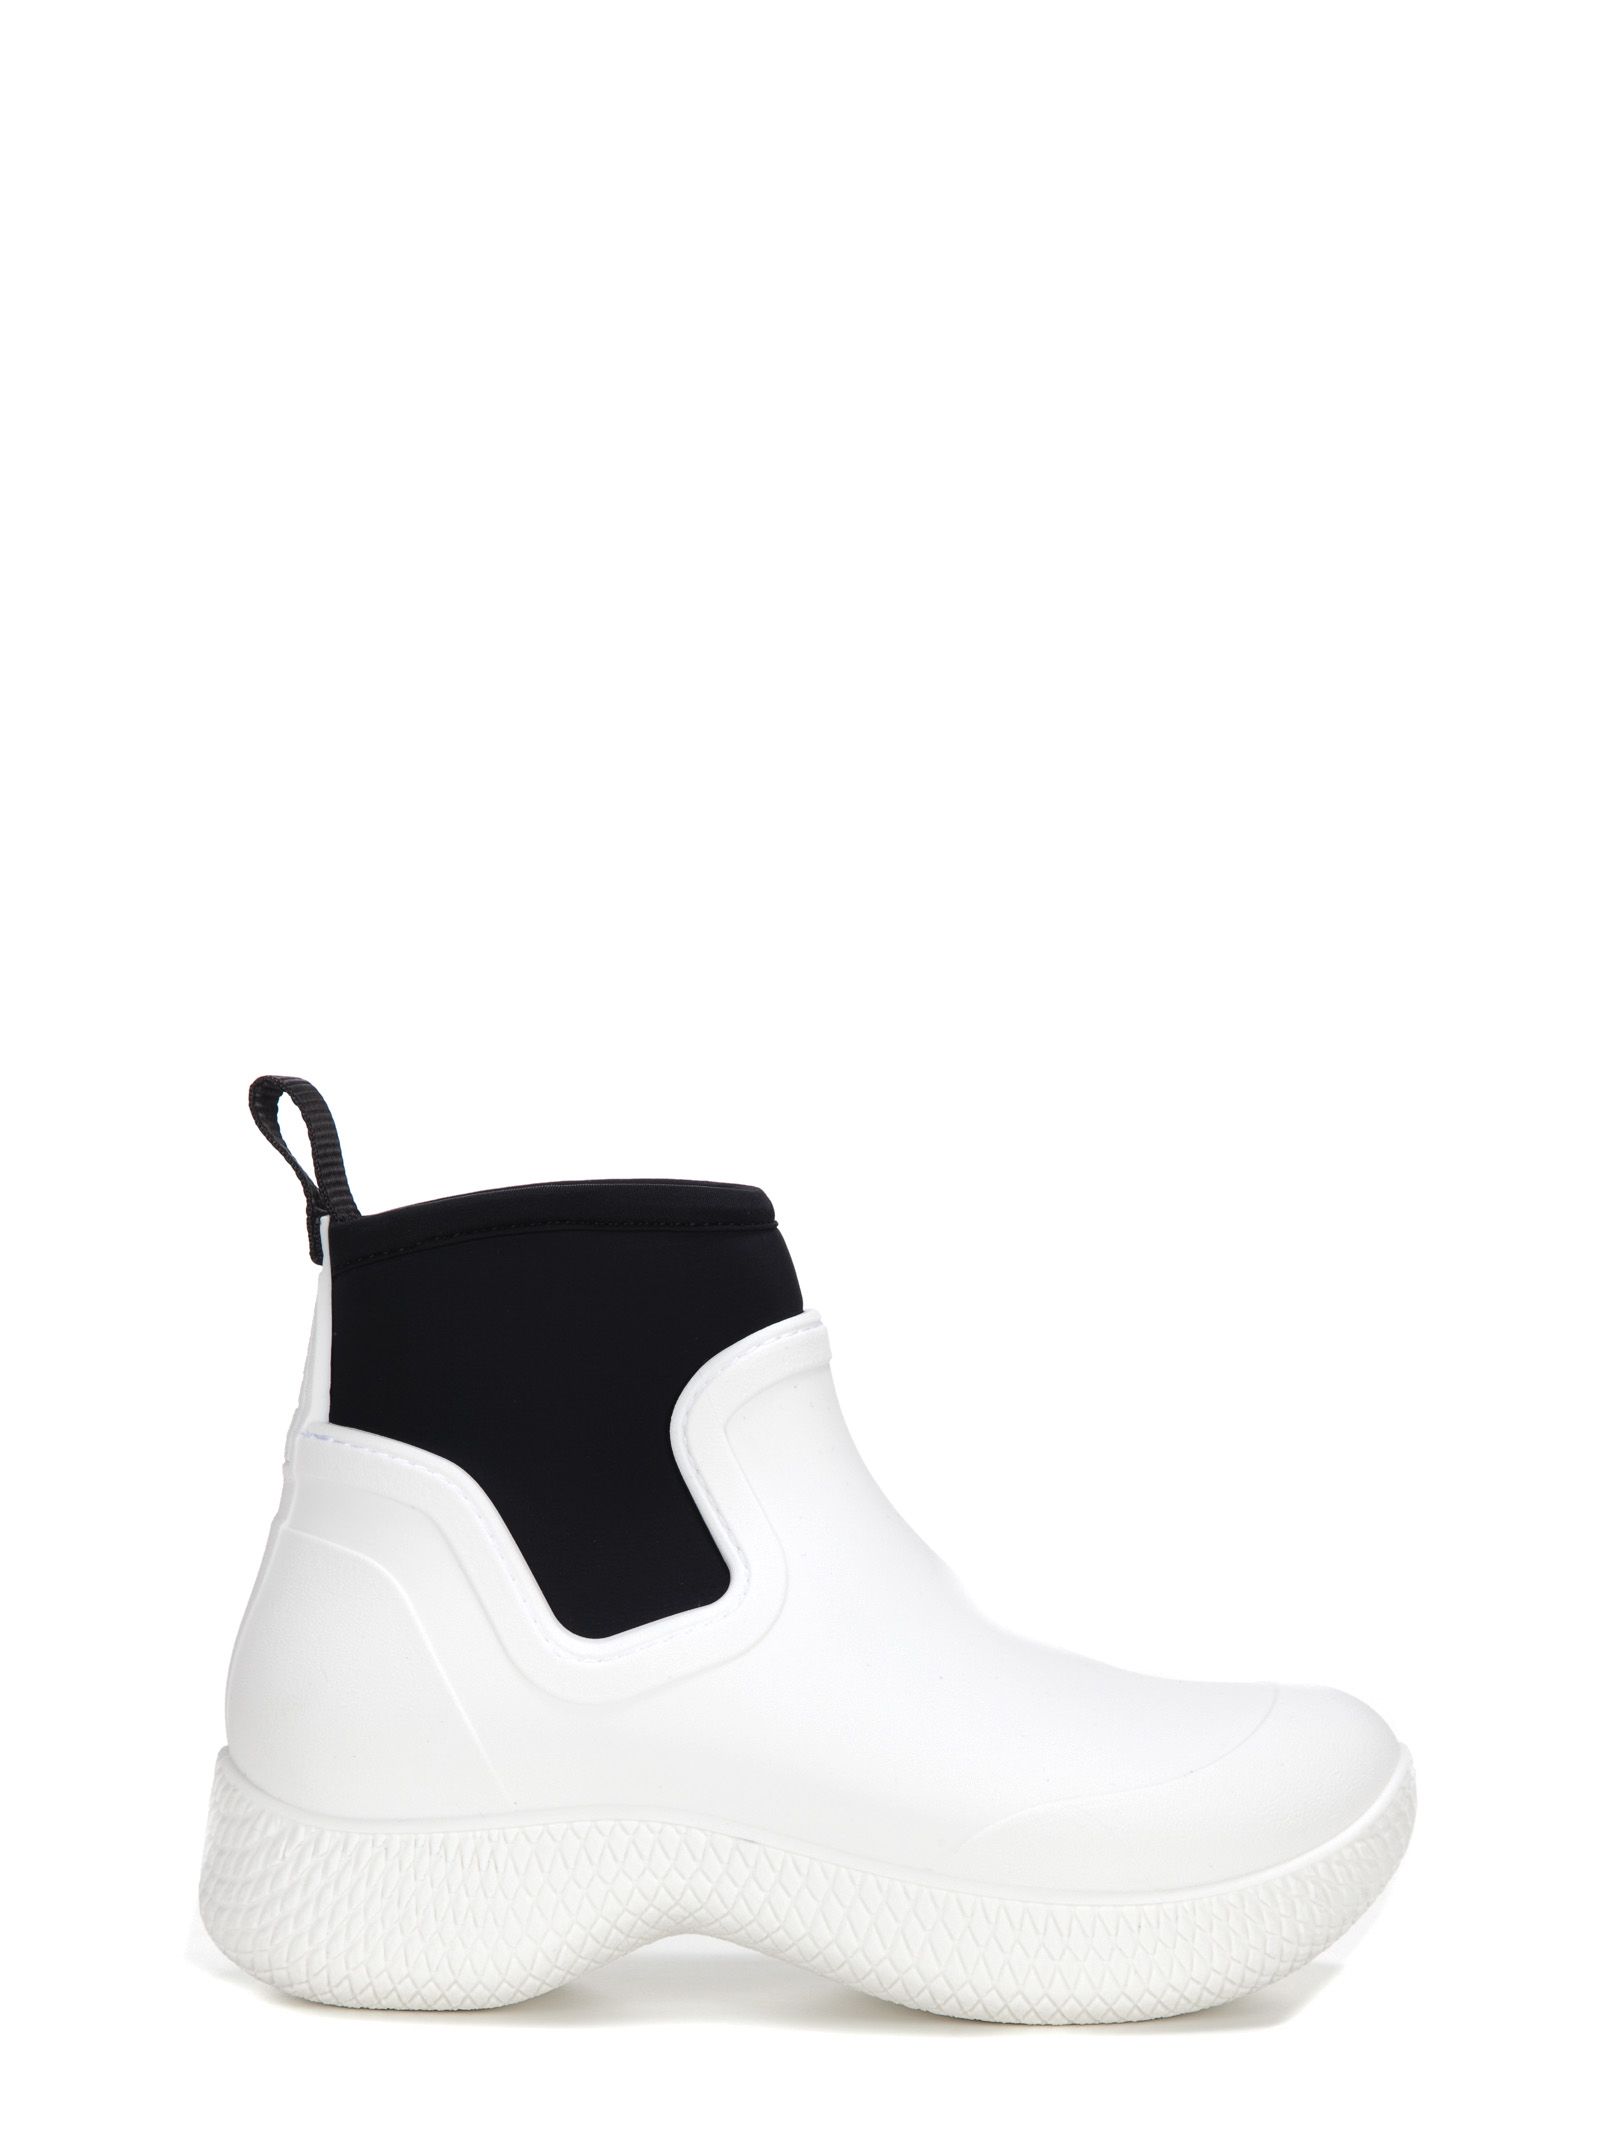 celine outdoor ankle boots